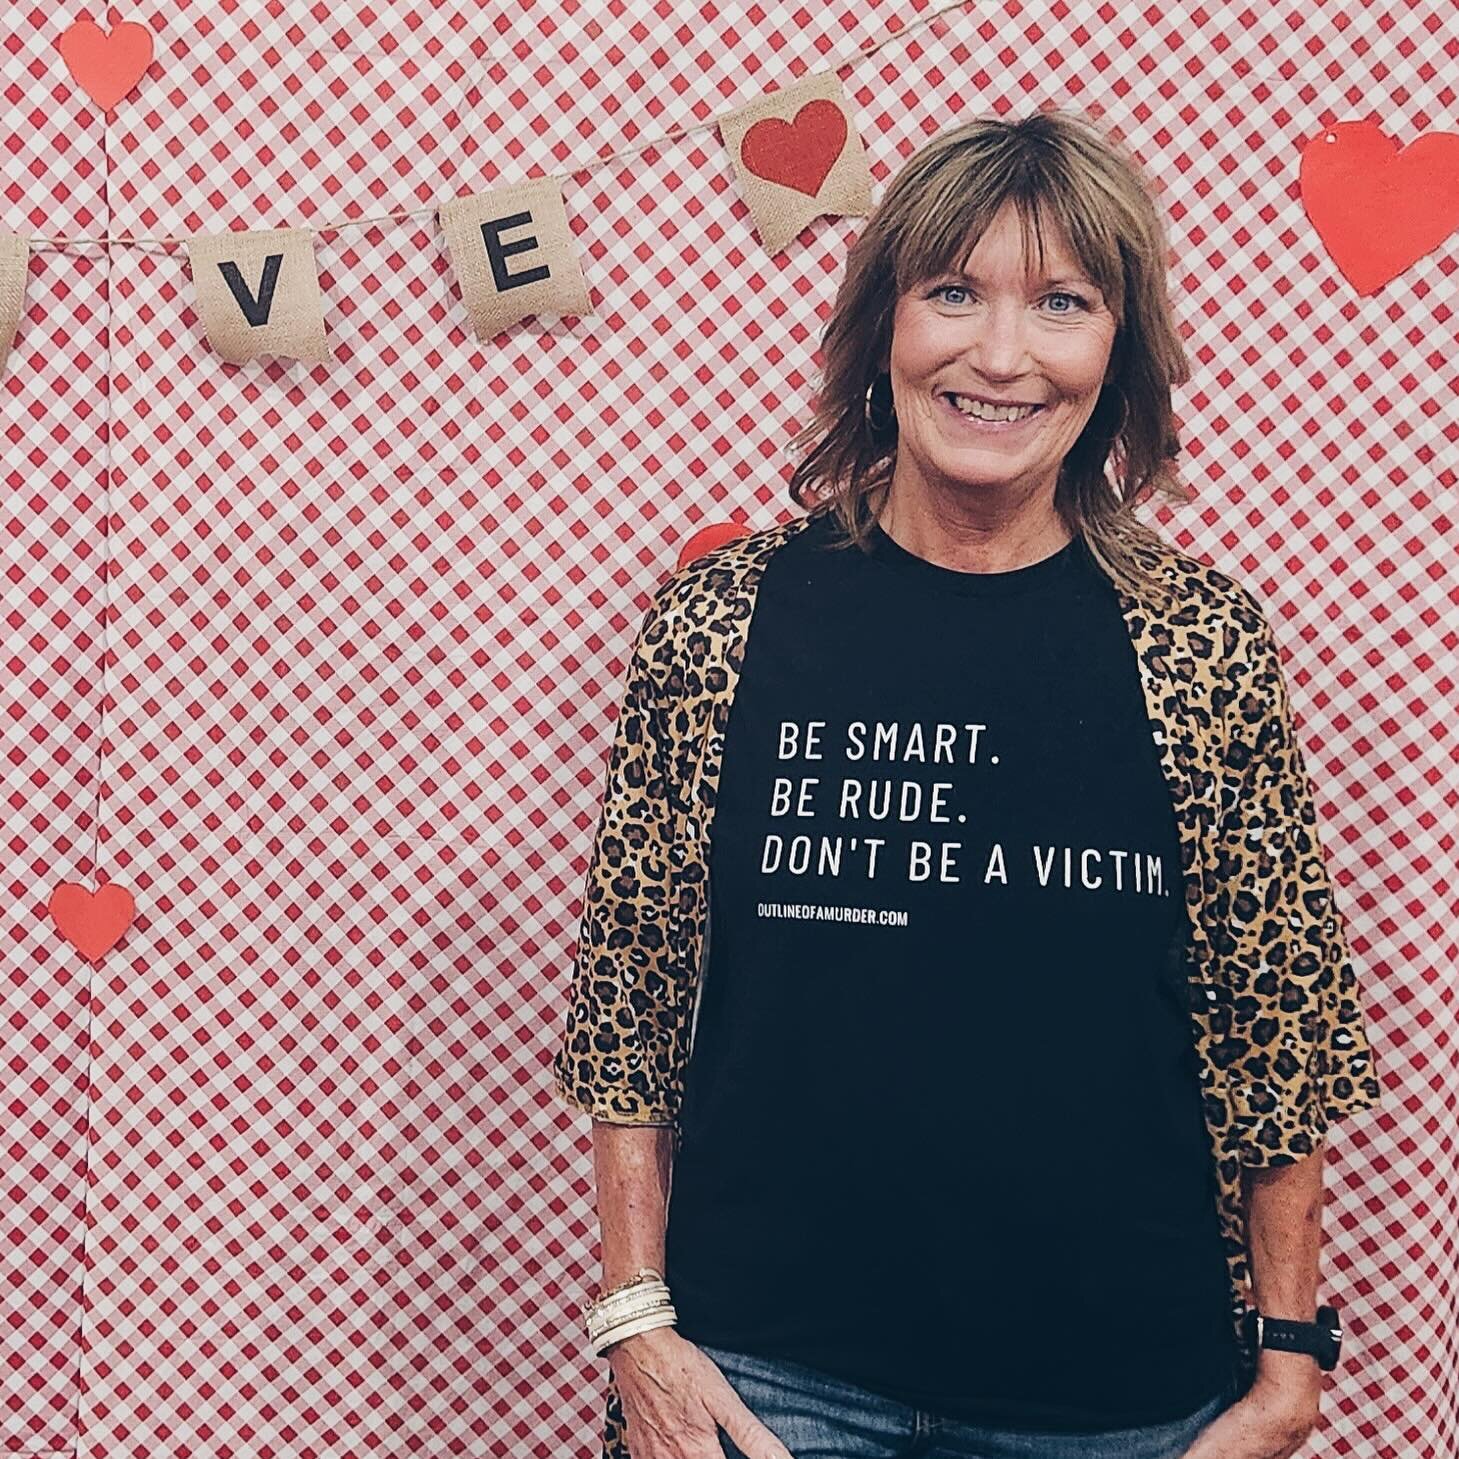 We 🫶 Peggy. She&rsquo;s wearing our swag. 😎 She researches some of our cases and inspires two in our 2022 season, the Orsi Family Murders and Tracie McBride. Cheers Peggy!

#truecrime #truecrimecommunity #truecrimepodcast